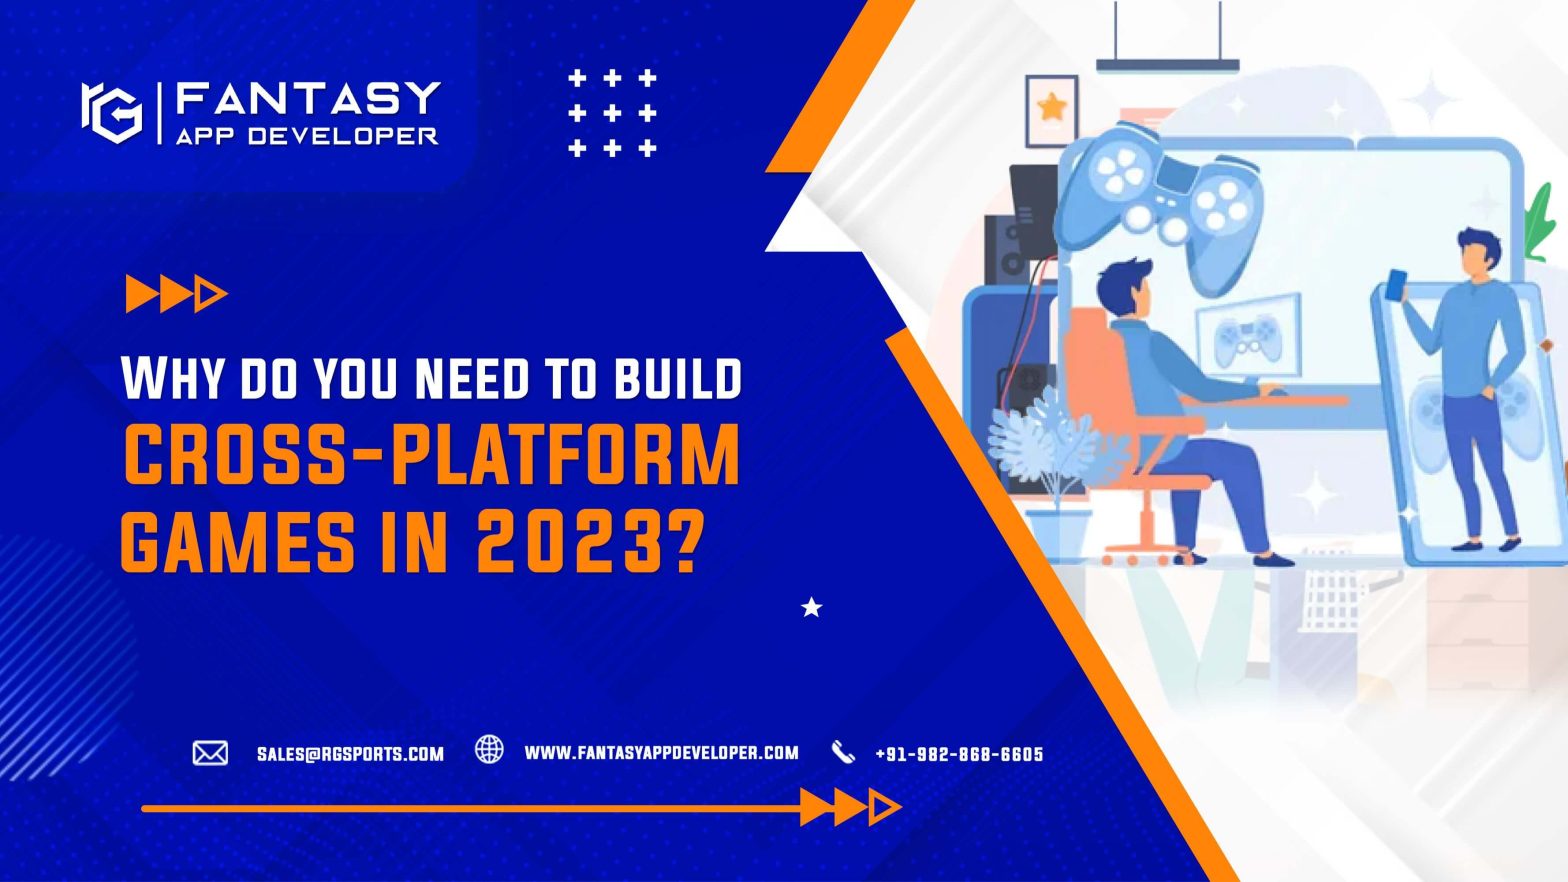 Why do you need to build cross-platform games in 2023